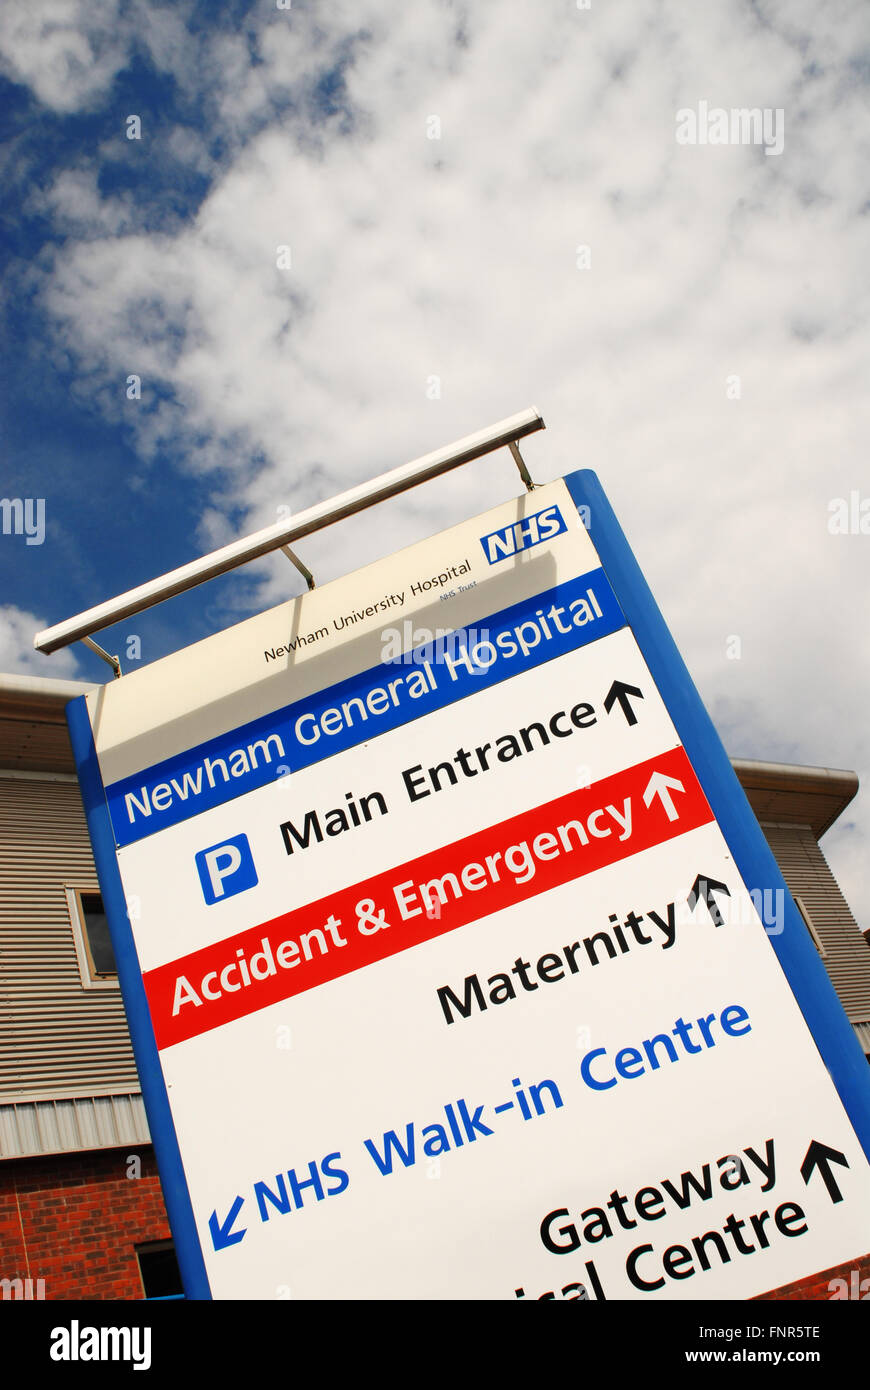 Main entrance to the NHS Newham University Hospital Plaistow England, which was opened  in 1983. Stock Photo